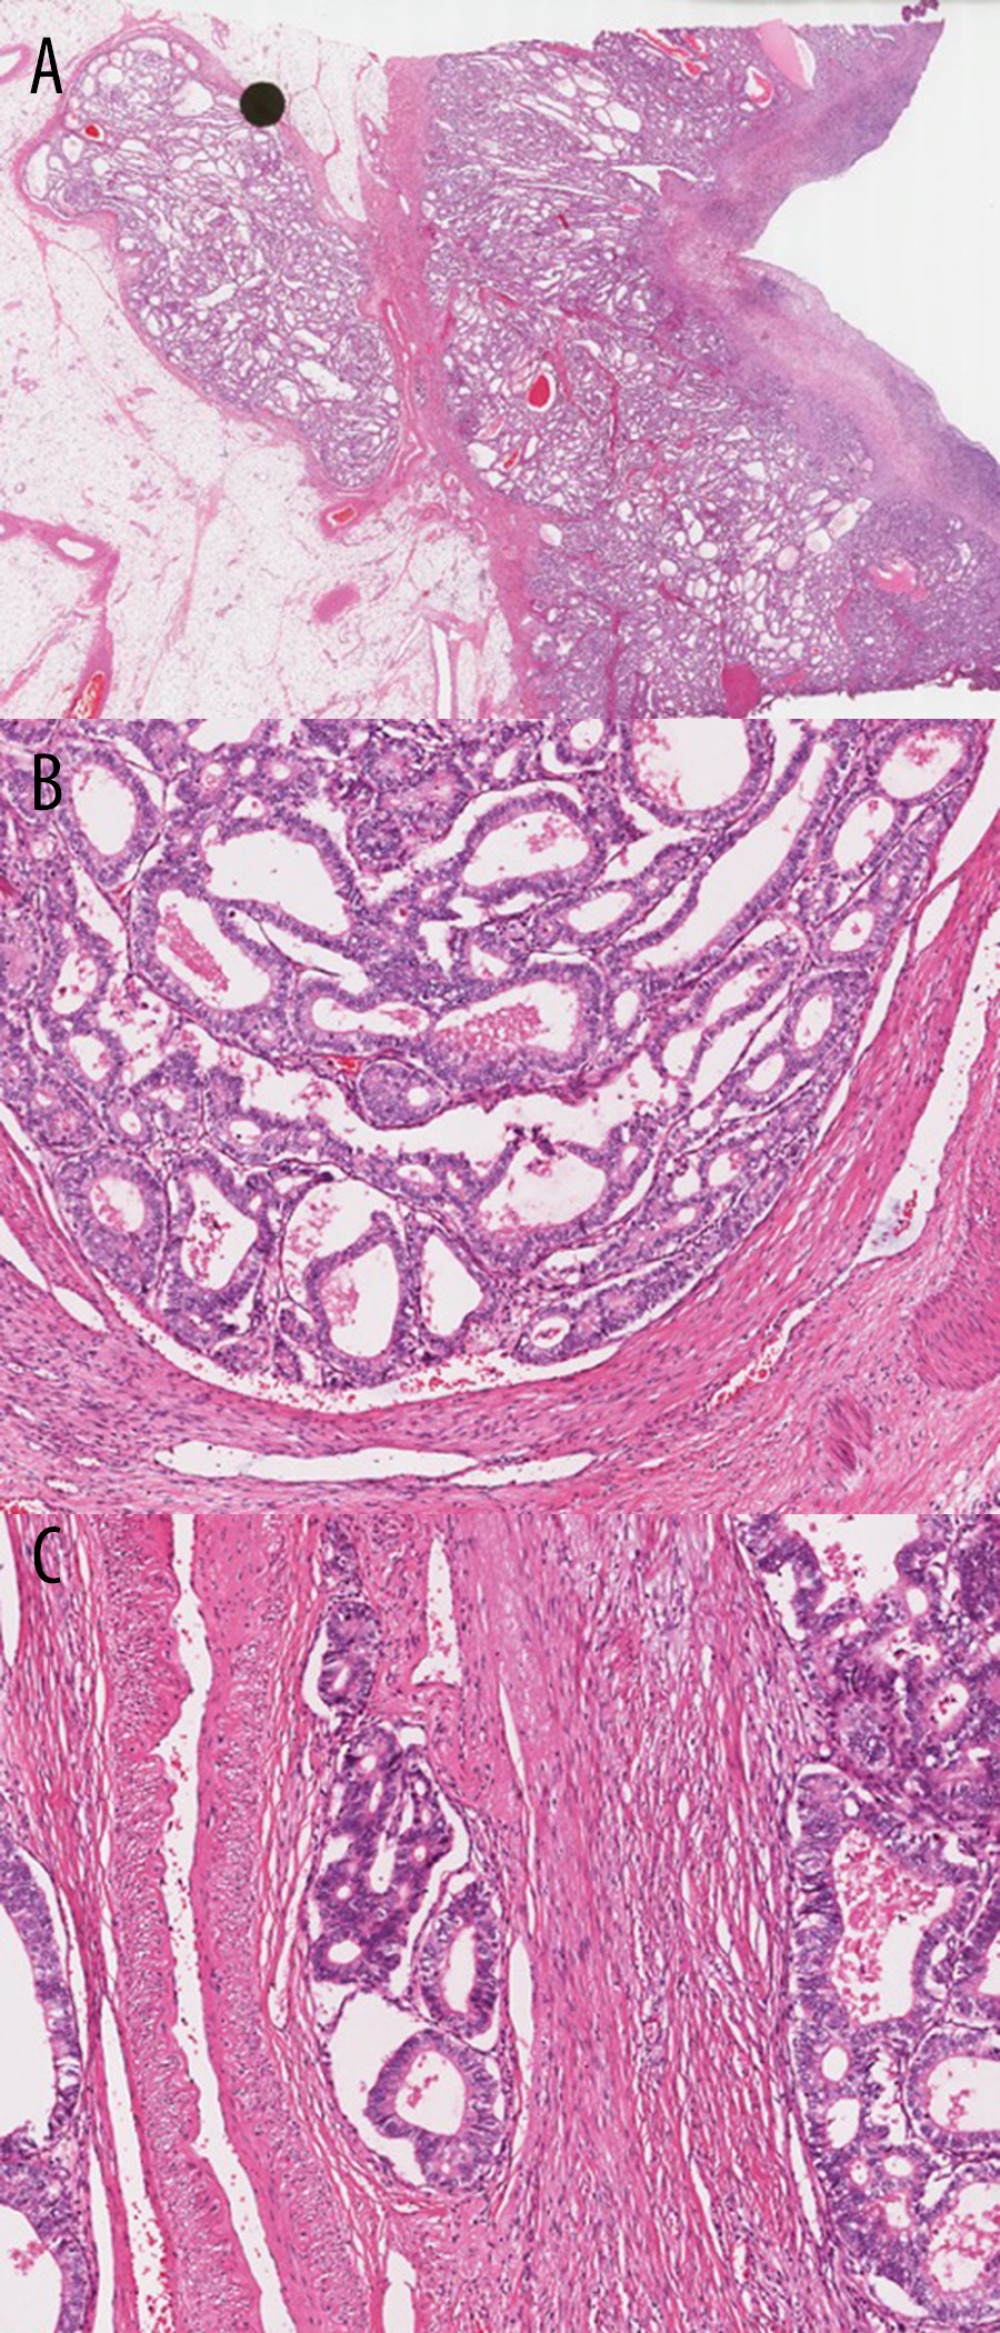 Histopathology slides of the distal descending colon mass shows (A, B) adenocarcinoma with moderate differentiation, and (C) demonstrates vascular invasion. (Hematoxylin-eosin, original magnifications ×4 [A], [B] ×20, and ×40 [C]).